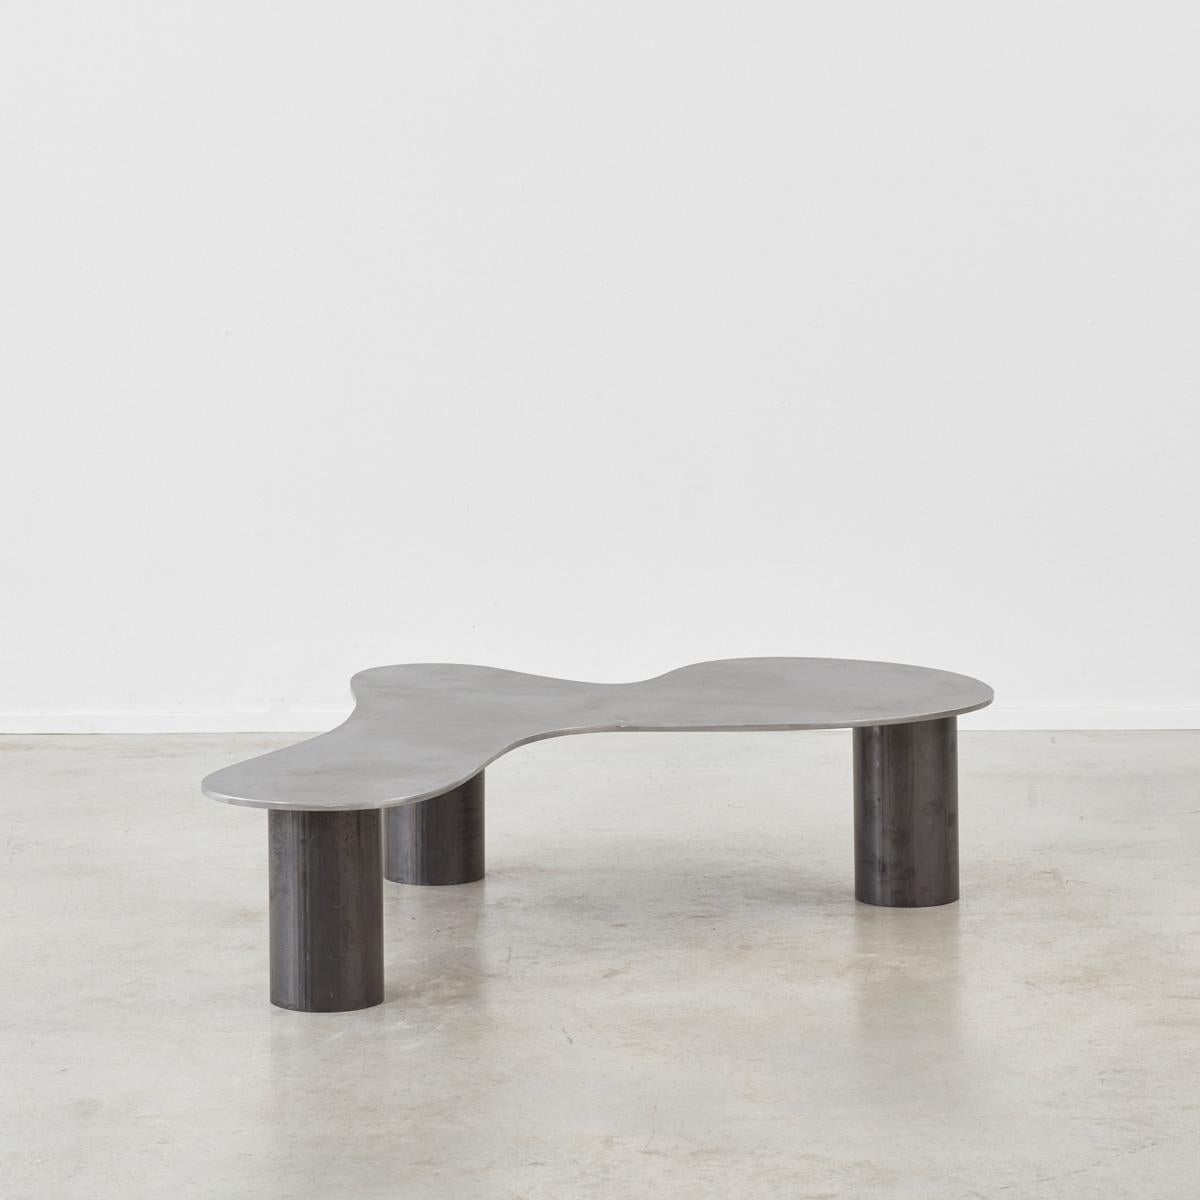 Coffee table 001 is a made to order design by Archive for Space, a multidisciplinary design practice founded in London in 2019. Coffee table 001 was designed to celebrate raw steel through exploring the material’s cyclical nature. Made from standard